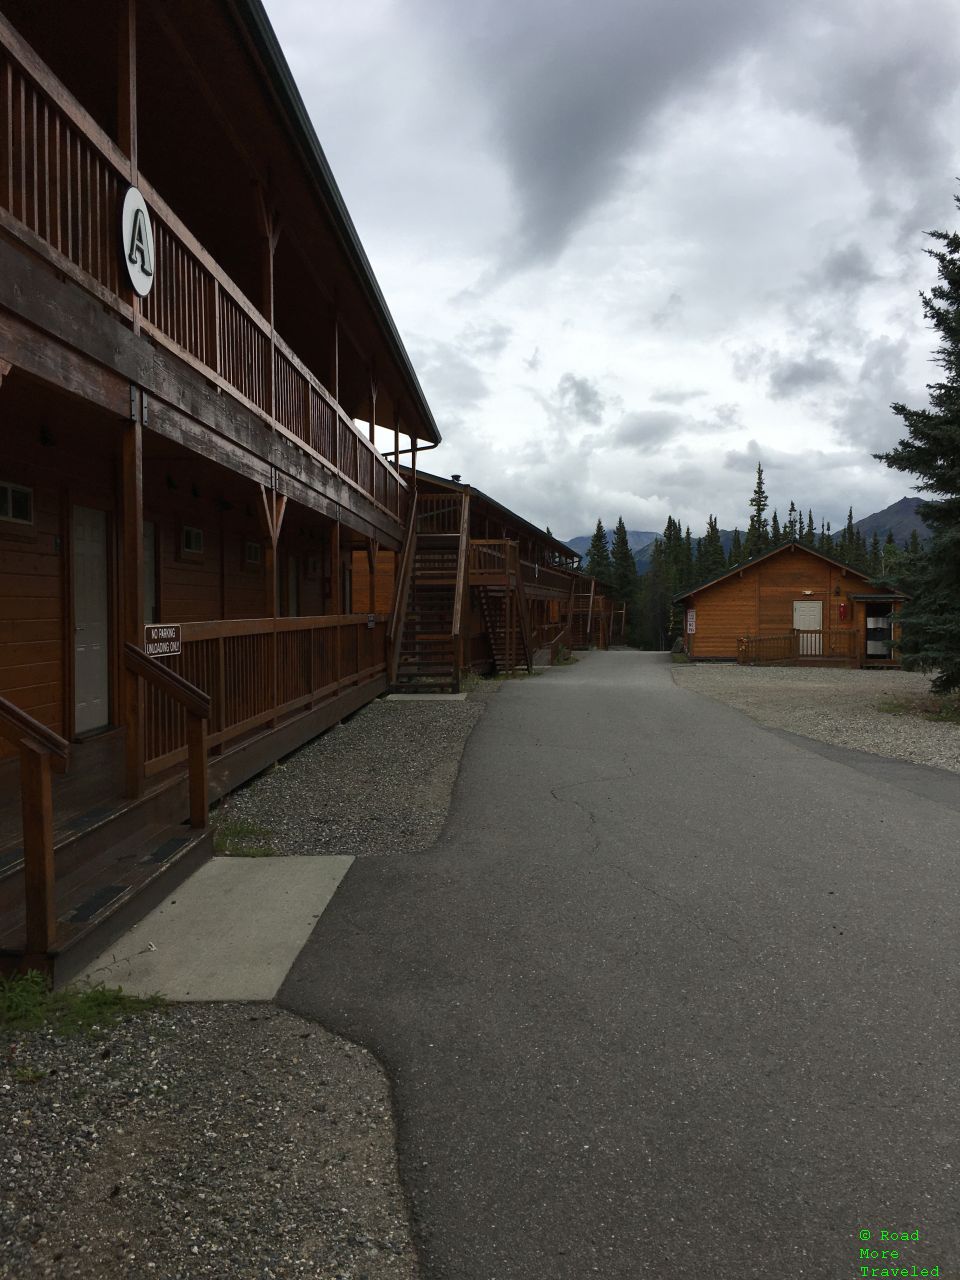 Denali Grizzly Bear motel rooms